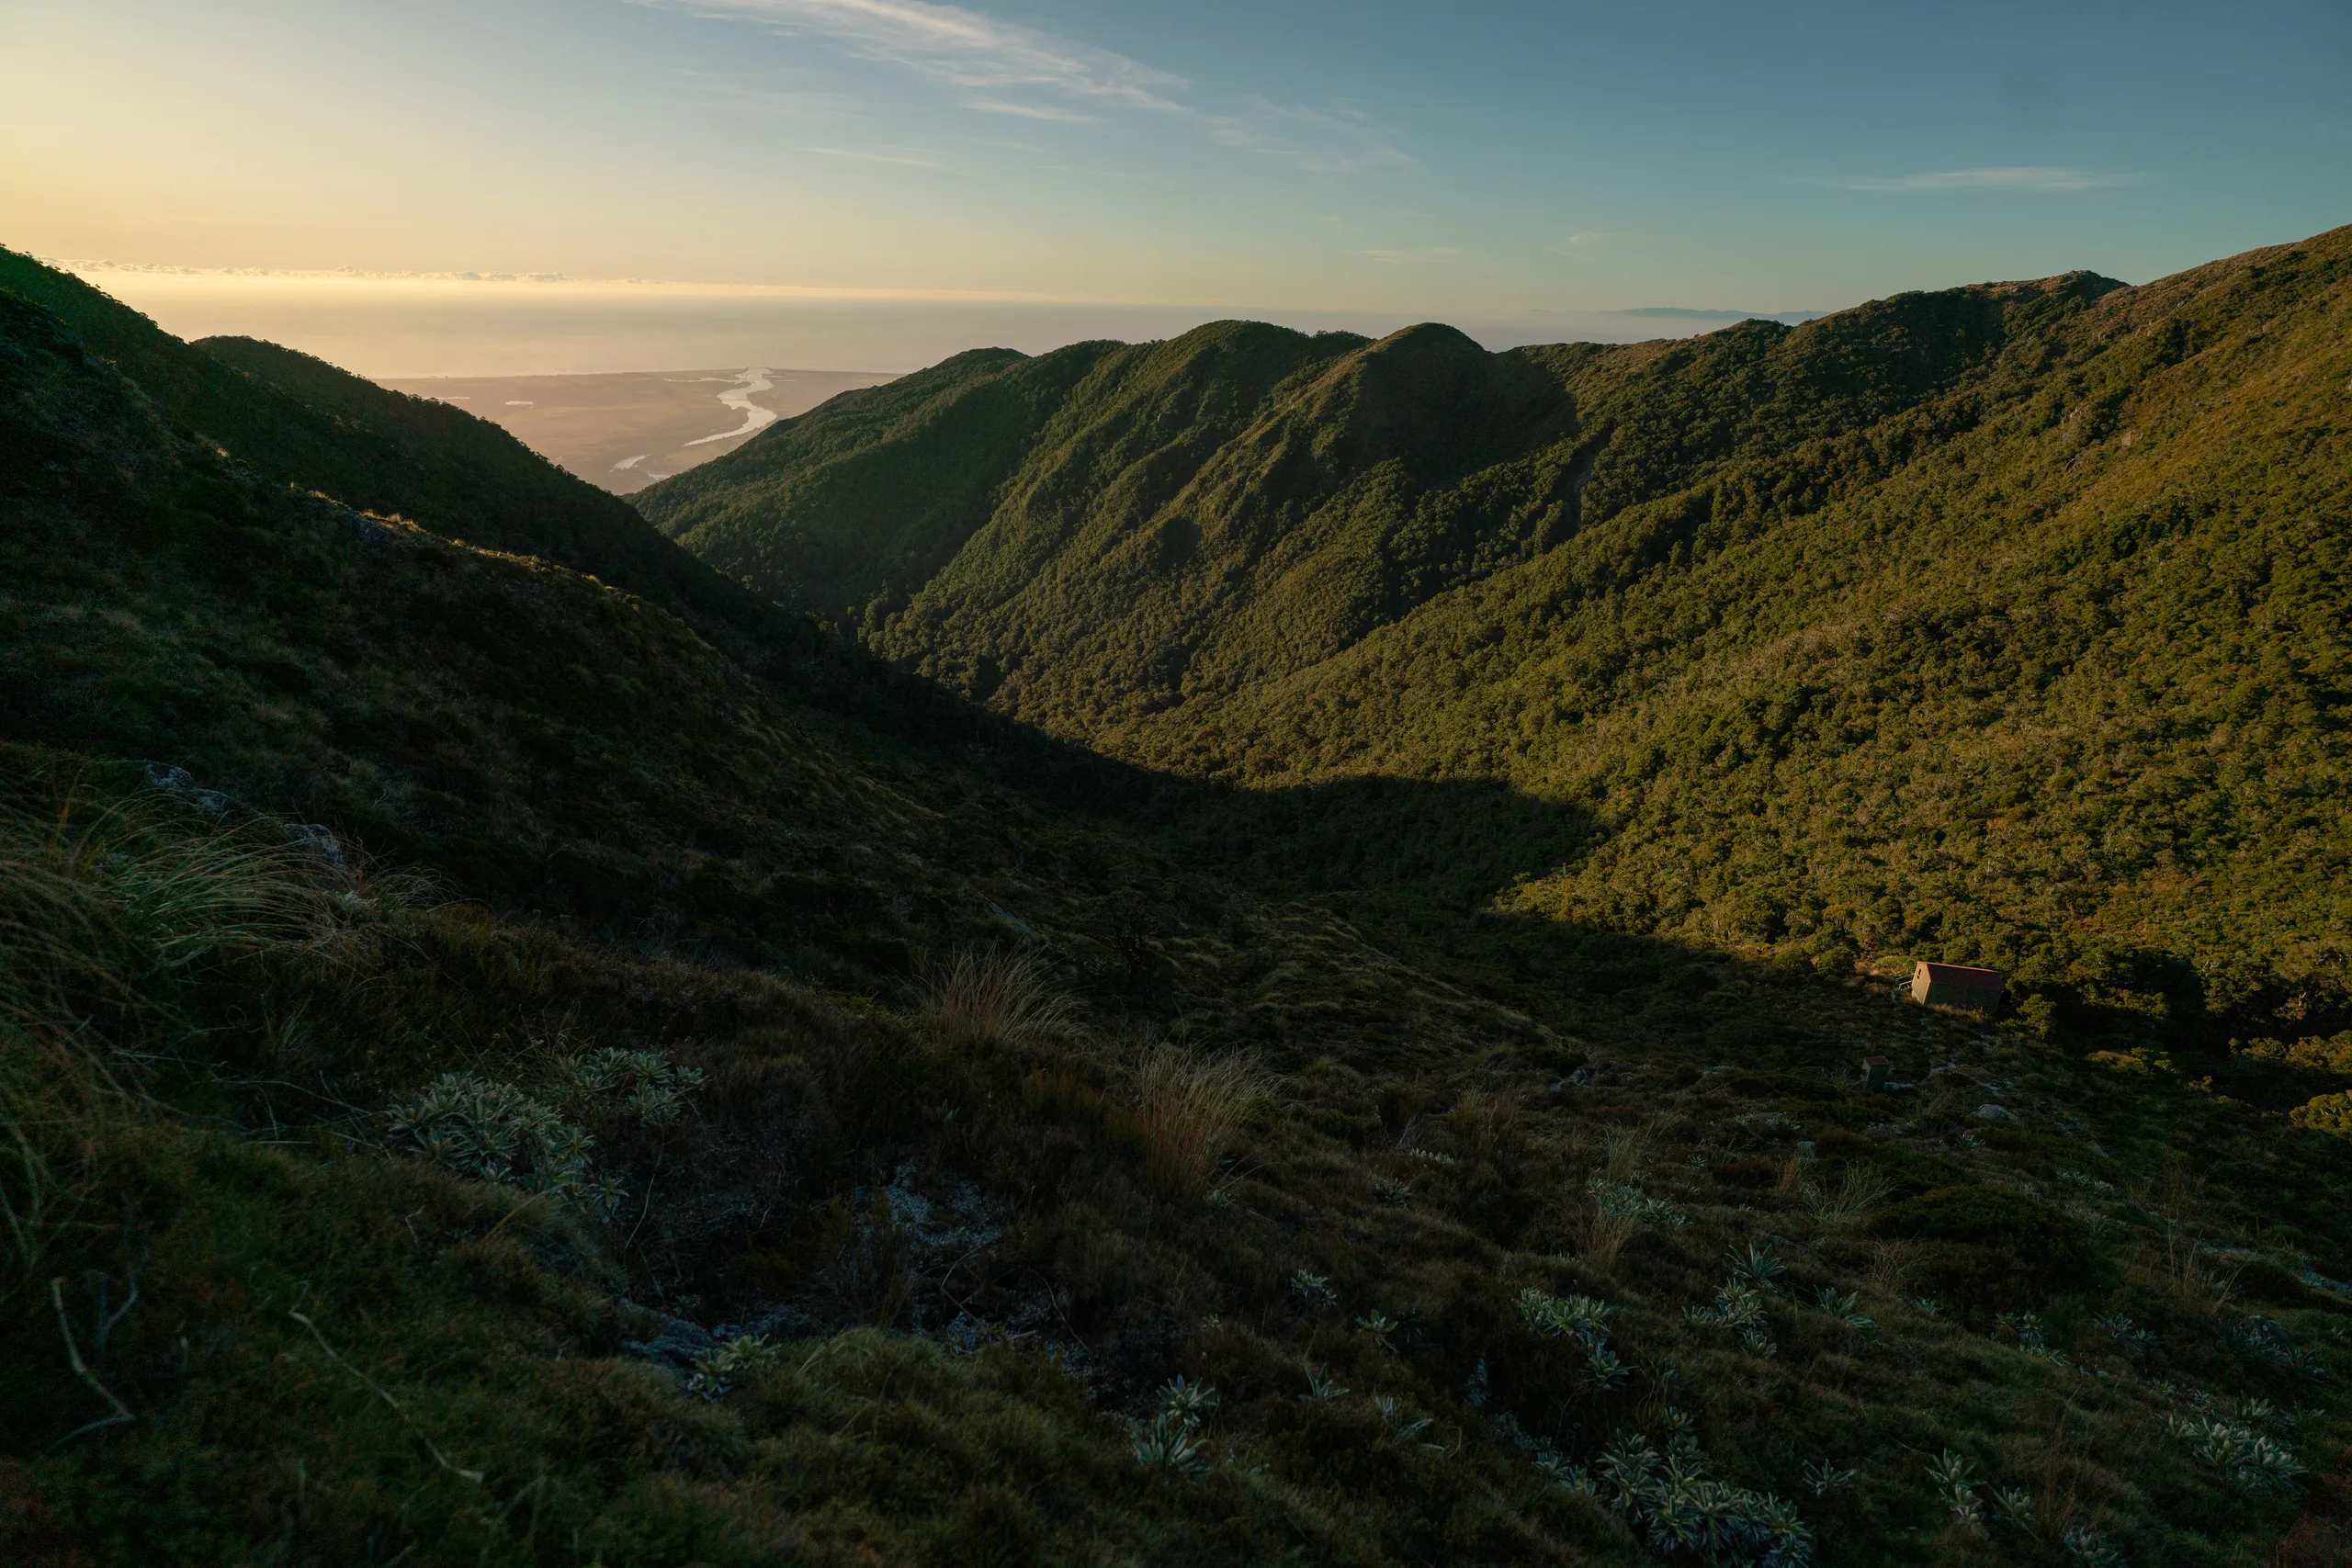 Buckland Peaks Hut as viewed from the saddle. The mouth of the Buller River is in the distance, framed between hills.